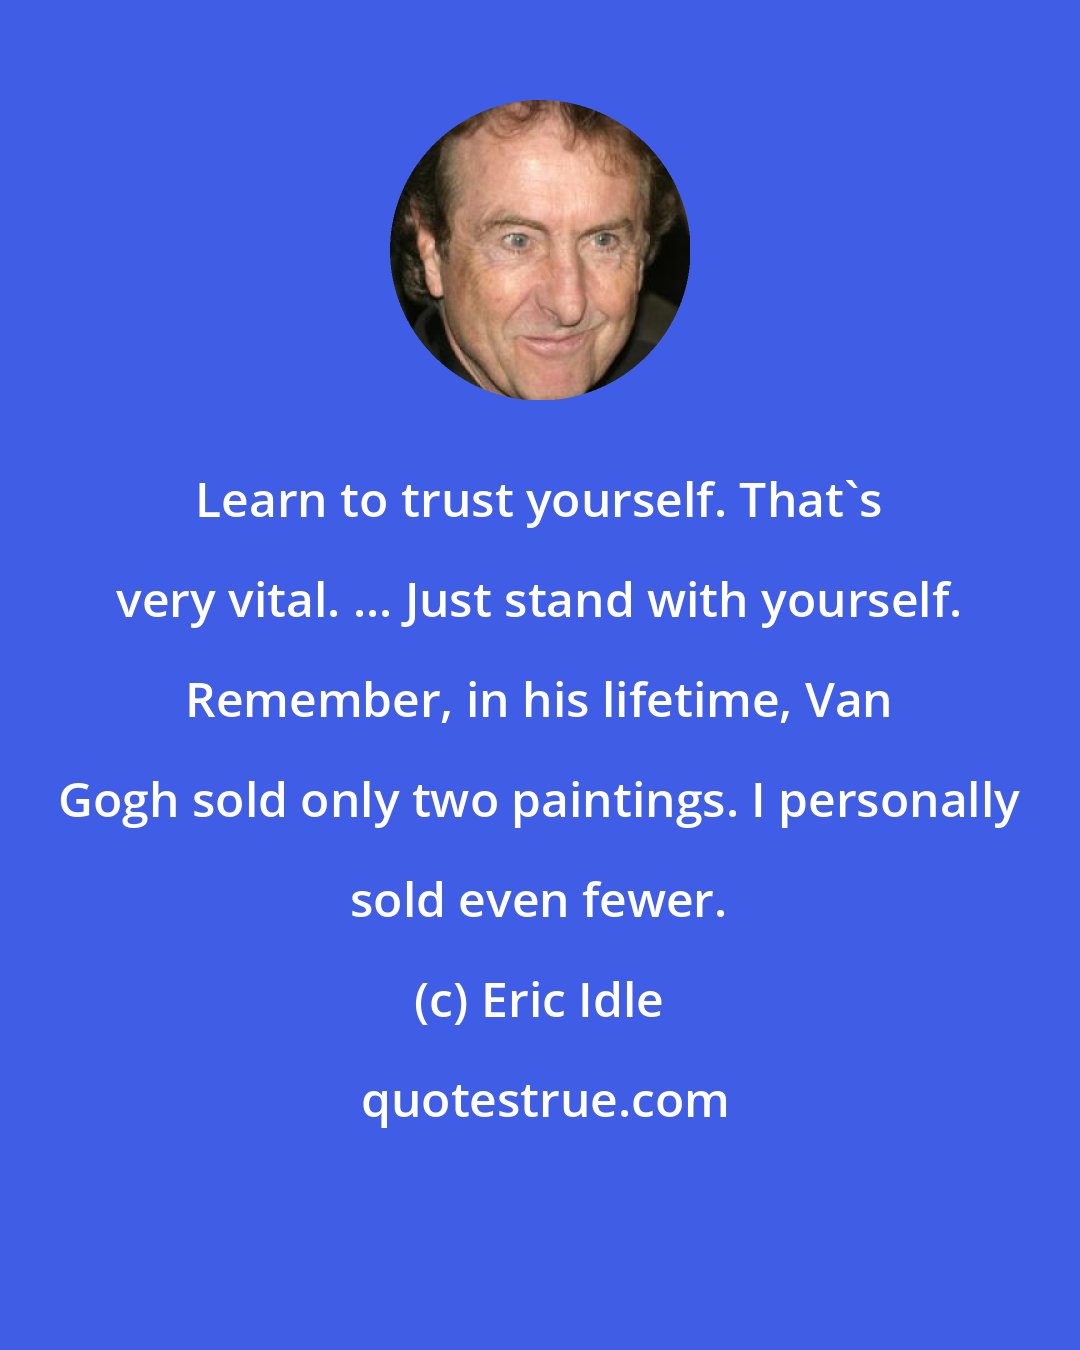 Eric Idle: Learn to trust yourself. That's very vital. ... Just stand with yourself. Remember, in his lifetime, Van Gogh sold only two paintings. I personally sold even fewer.